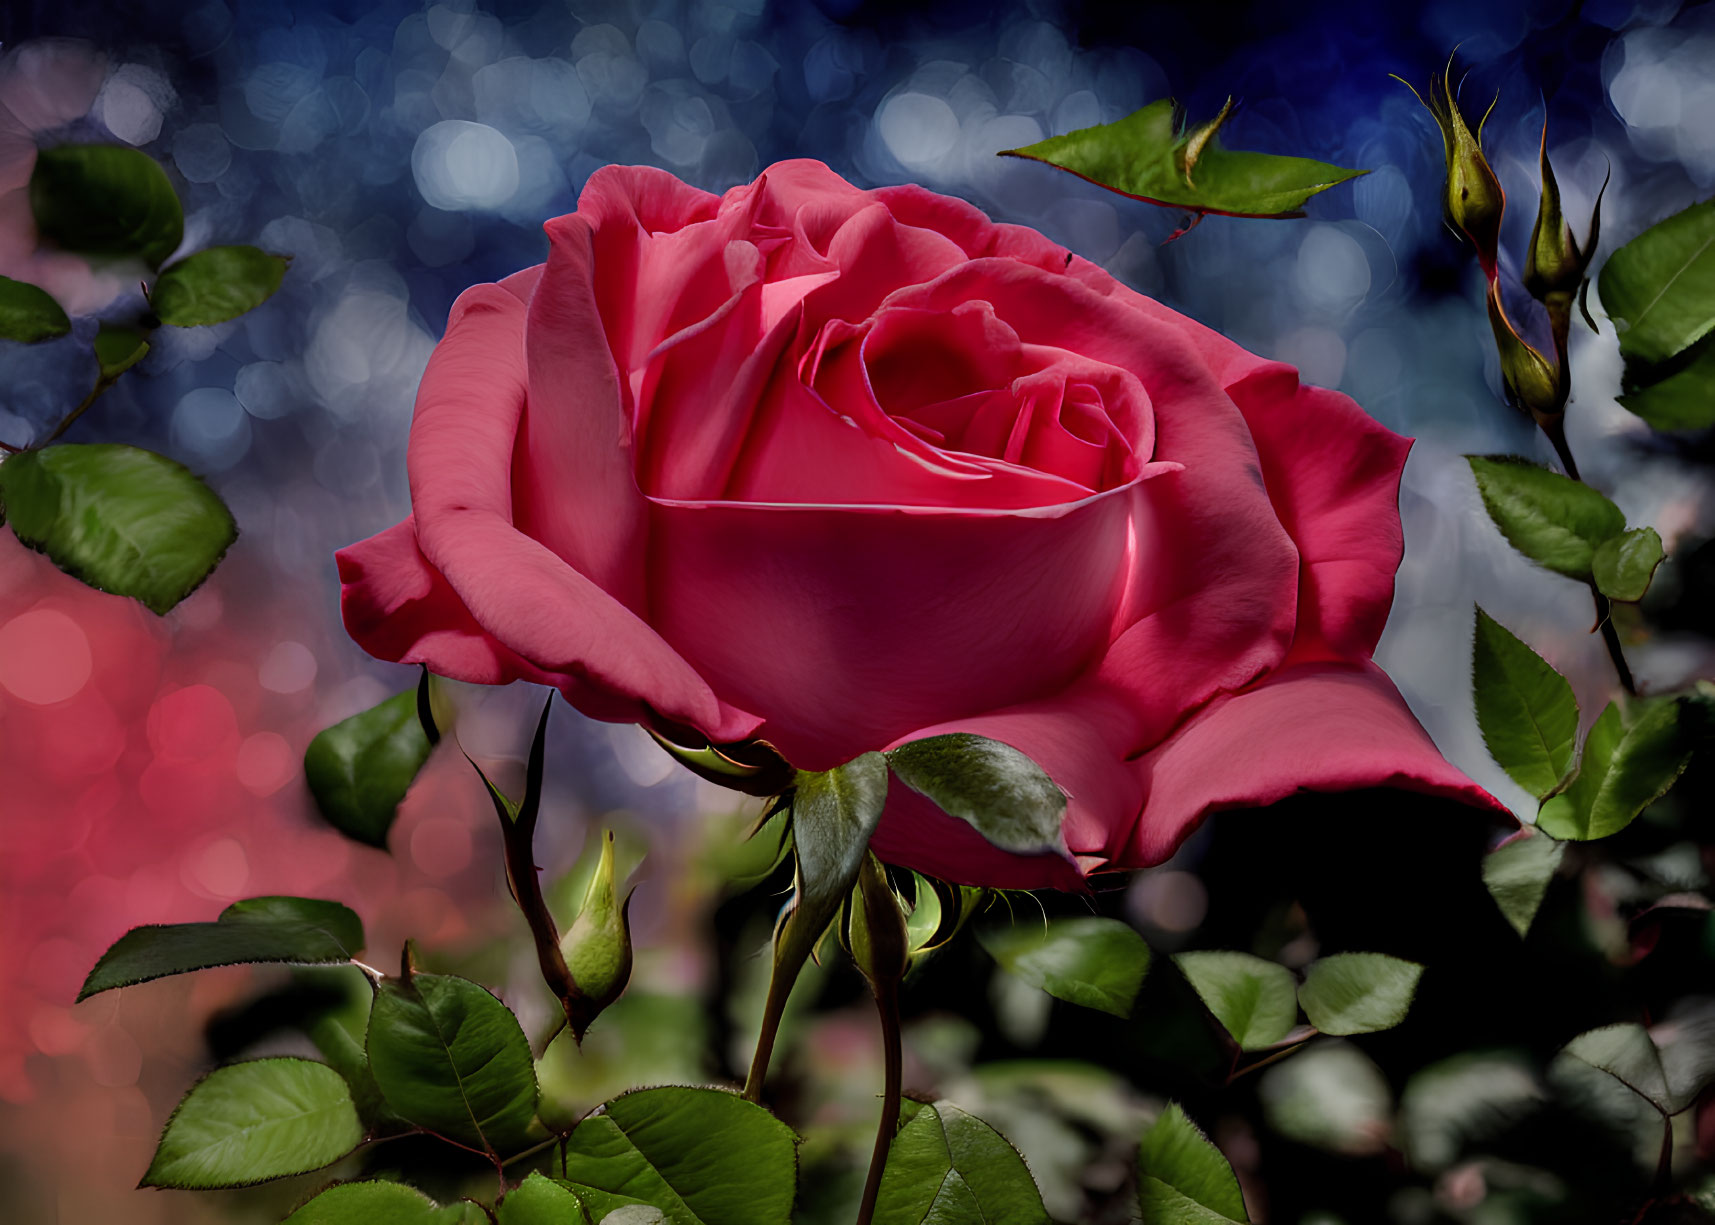 Bright Pink Rose in Full Bloom on Bokeh Background with Green Foliage